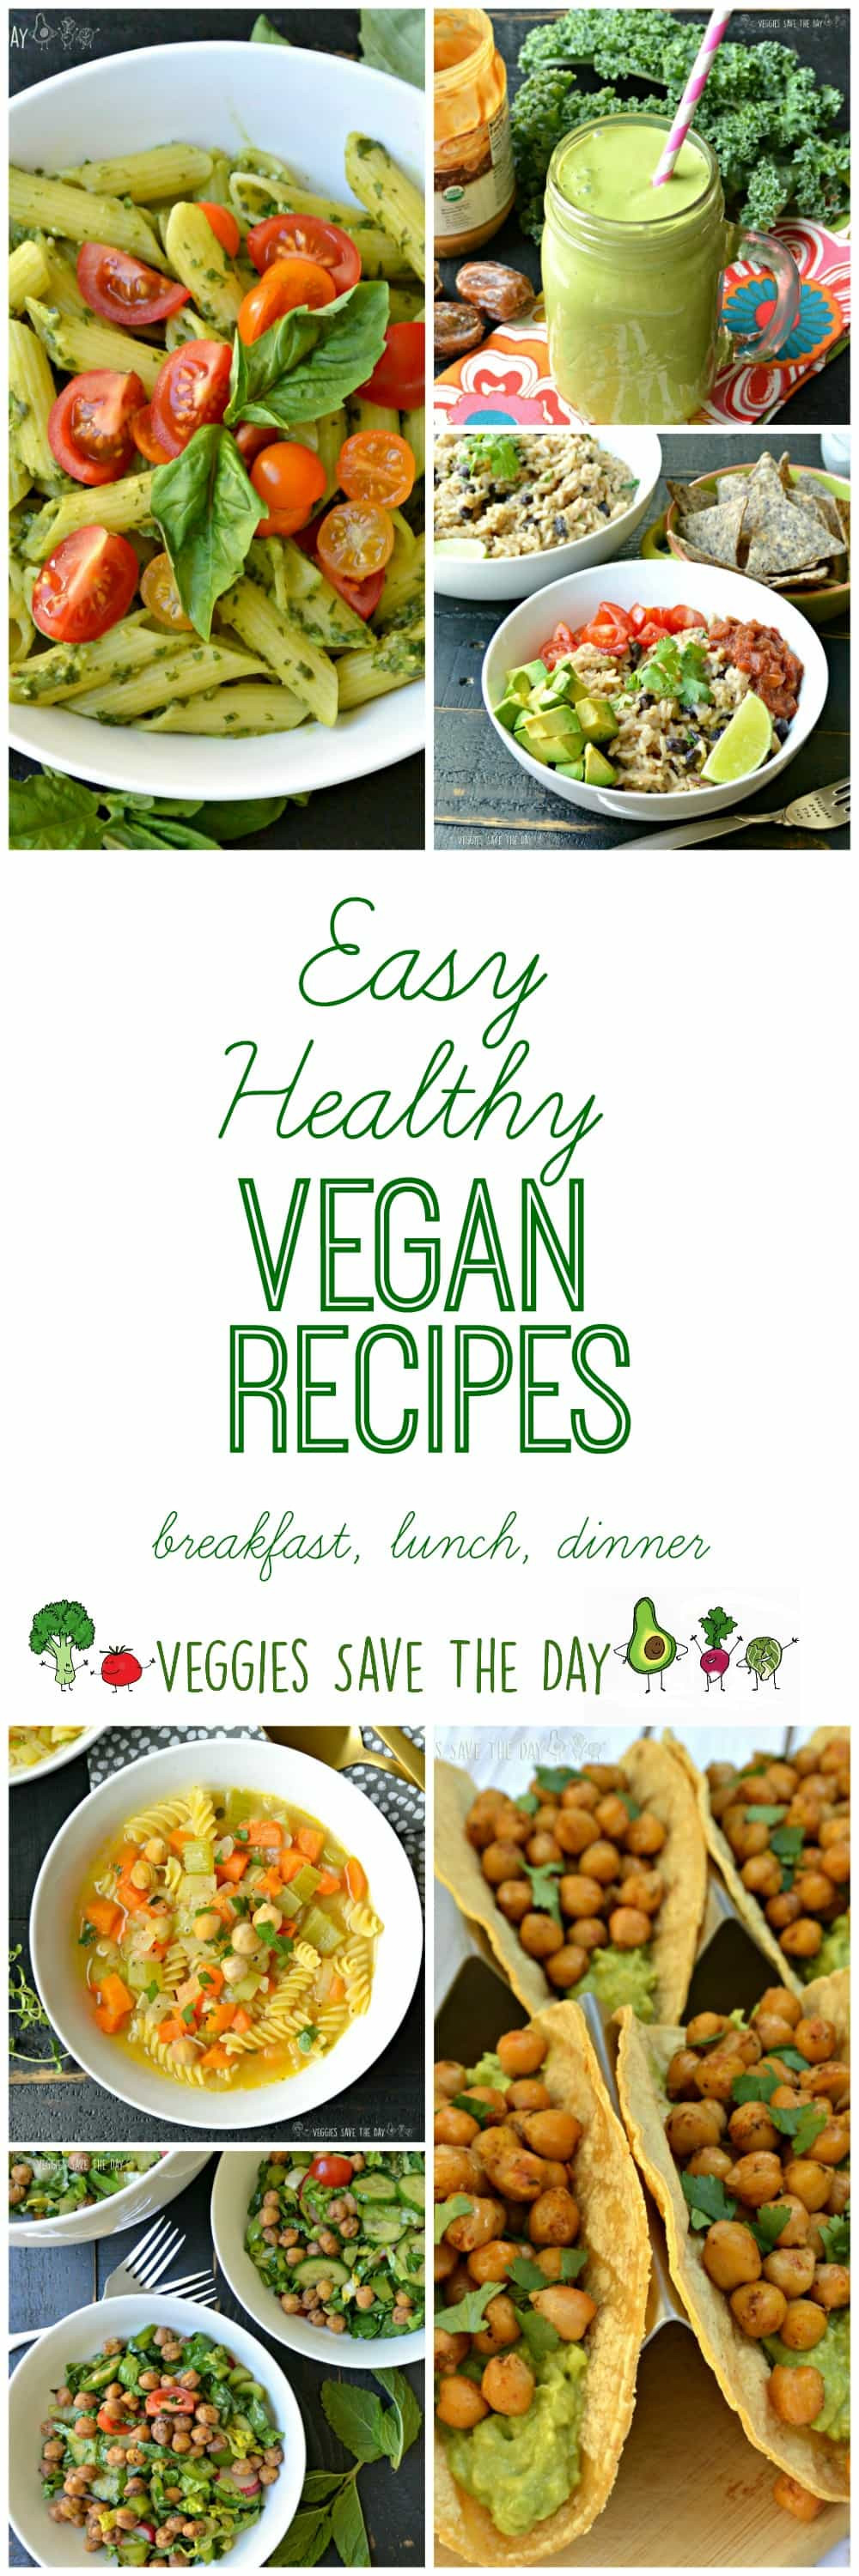 Easy Vegan: Simple Recipes for Healthy Eating 20 Best Ideas Easy Healthy Vegan Recipes Veggies Save the Day